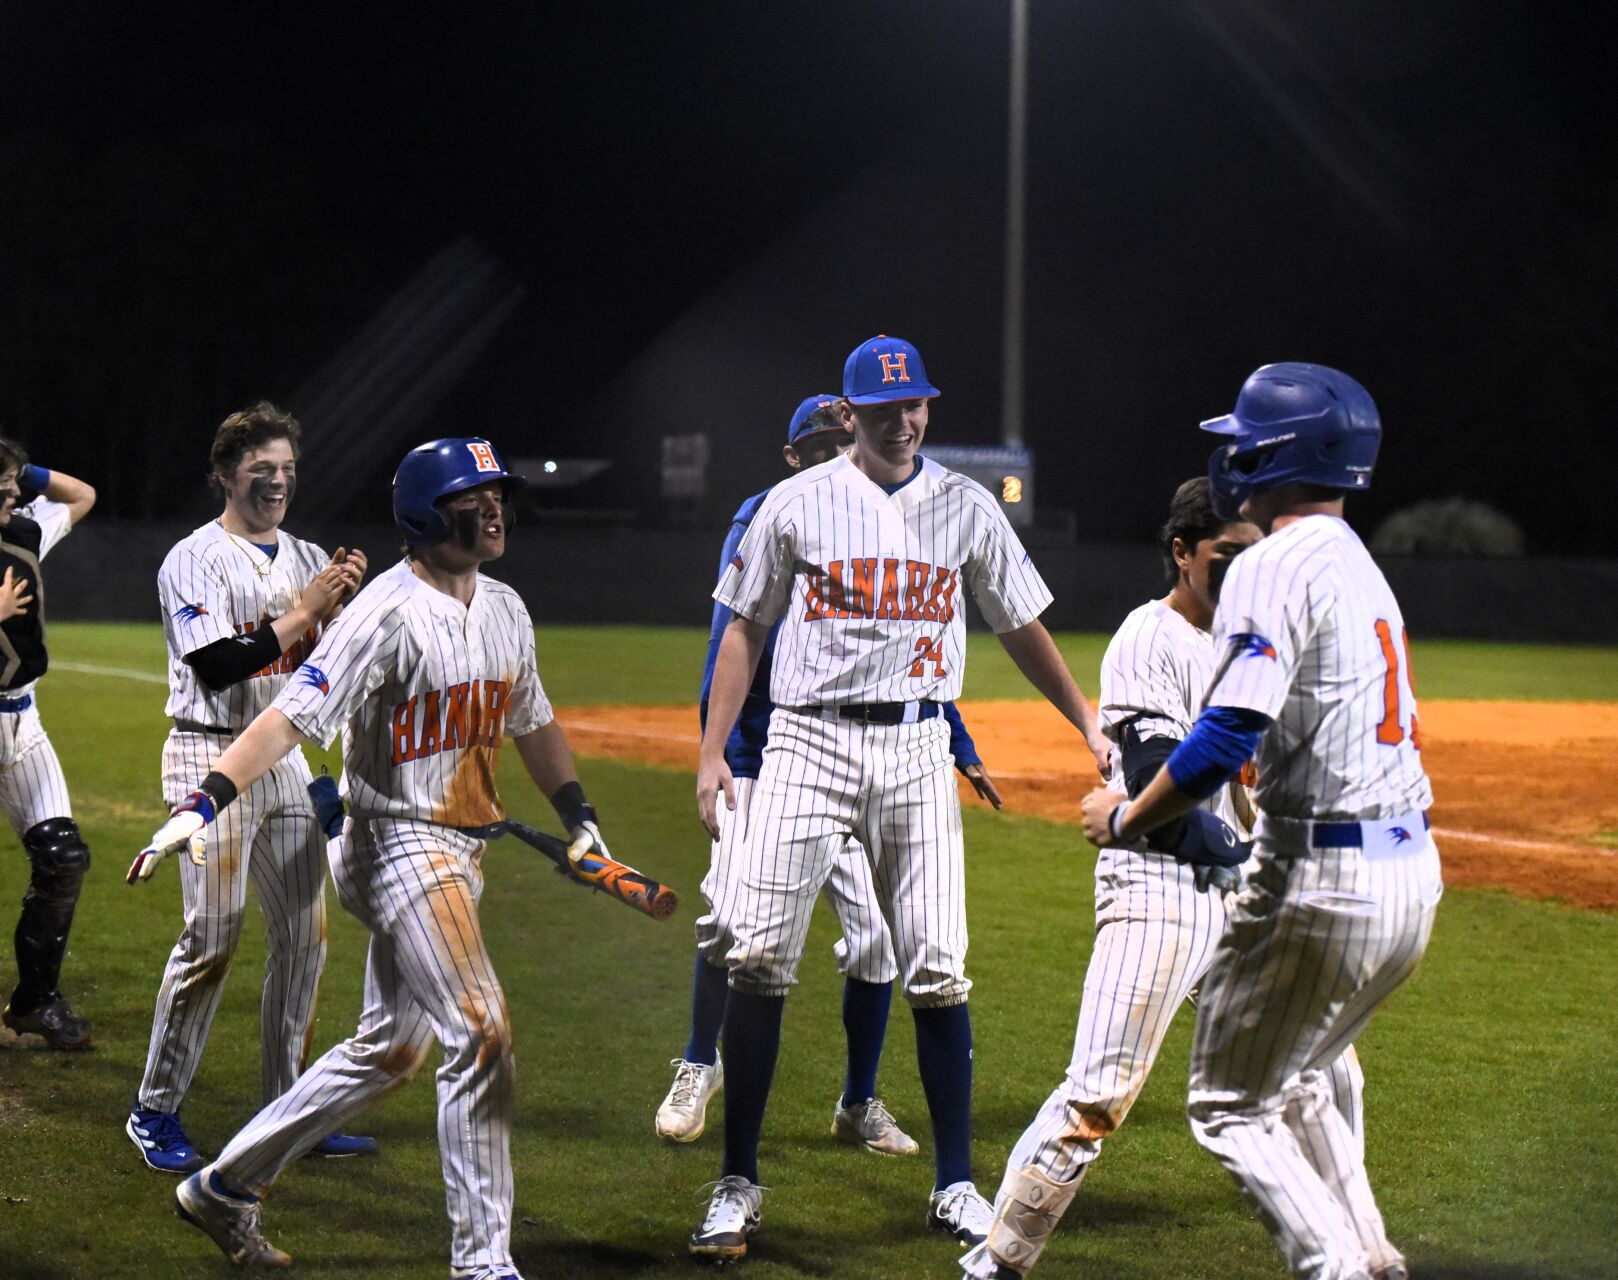 Top-Ranked Hanahan Hawks Continue Dominant Streak with 10 Consecutive Wins